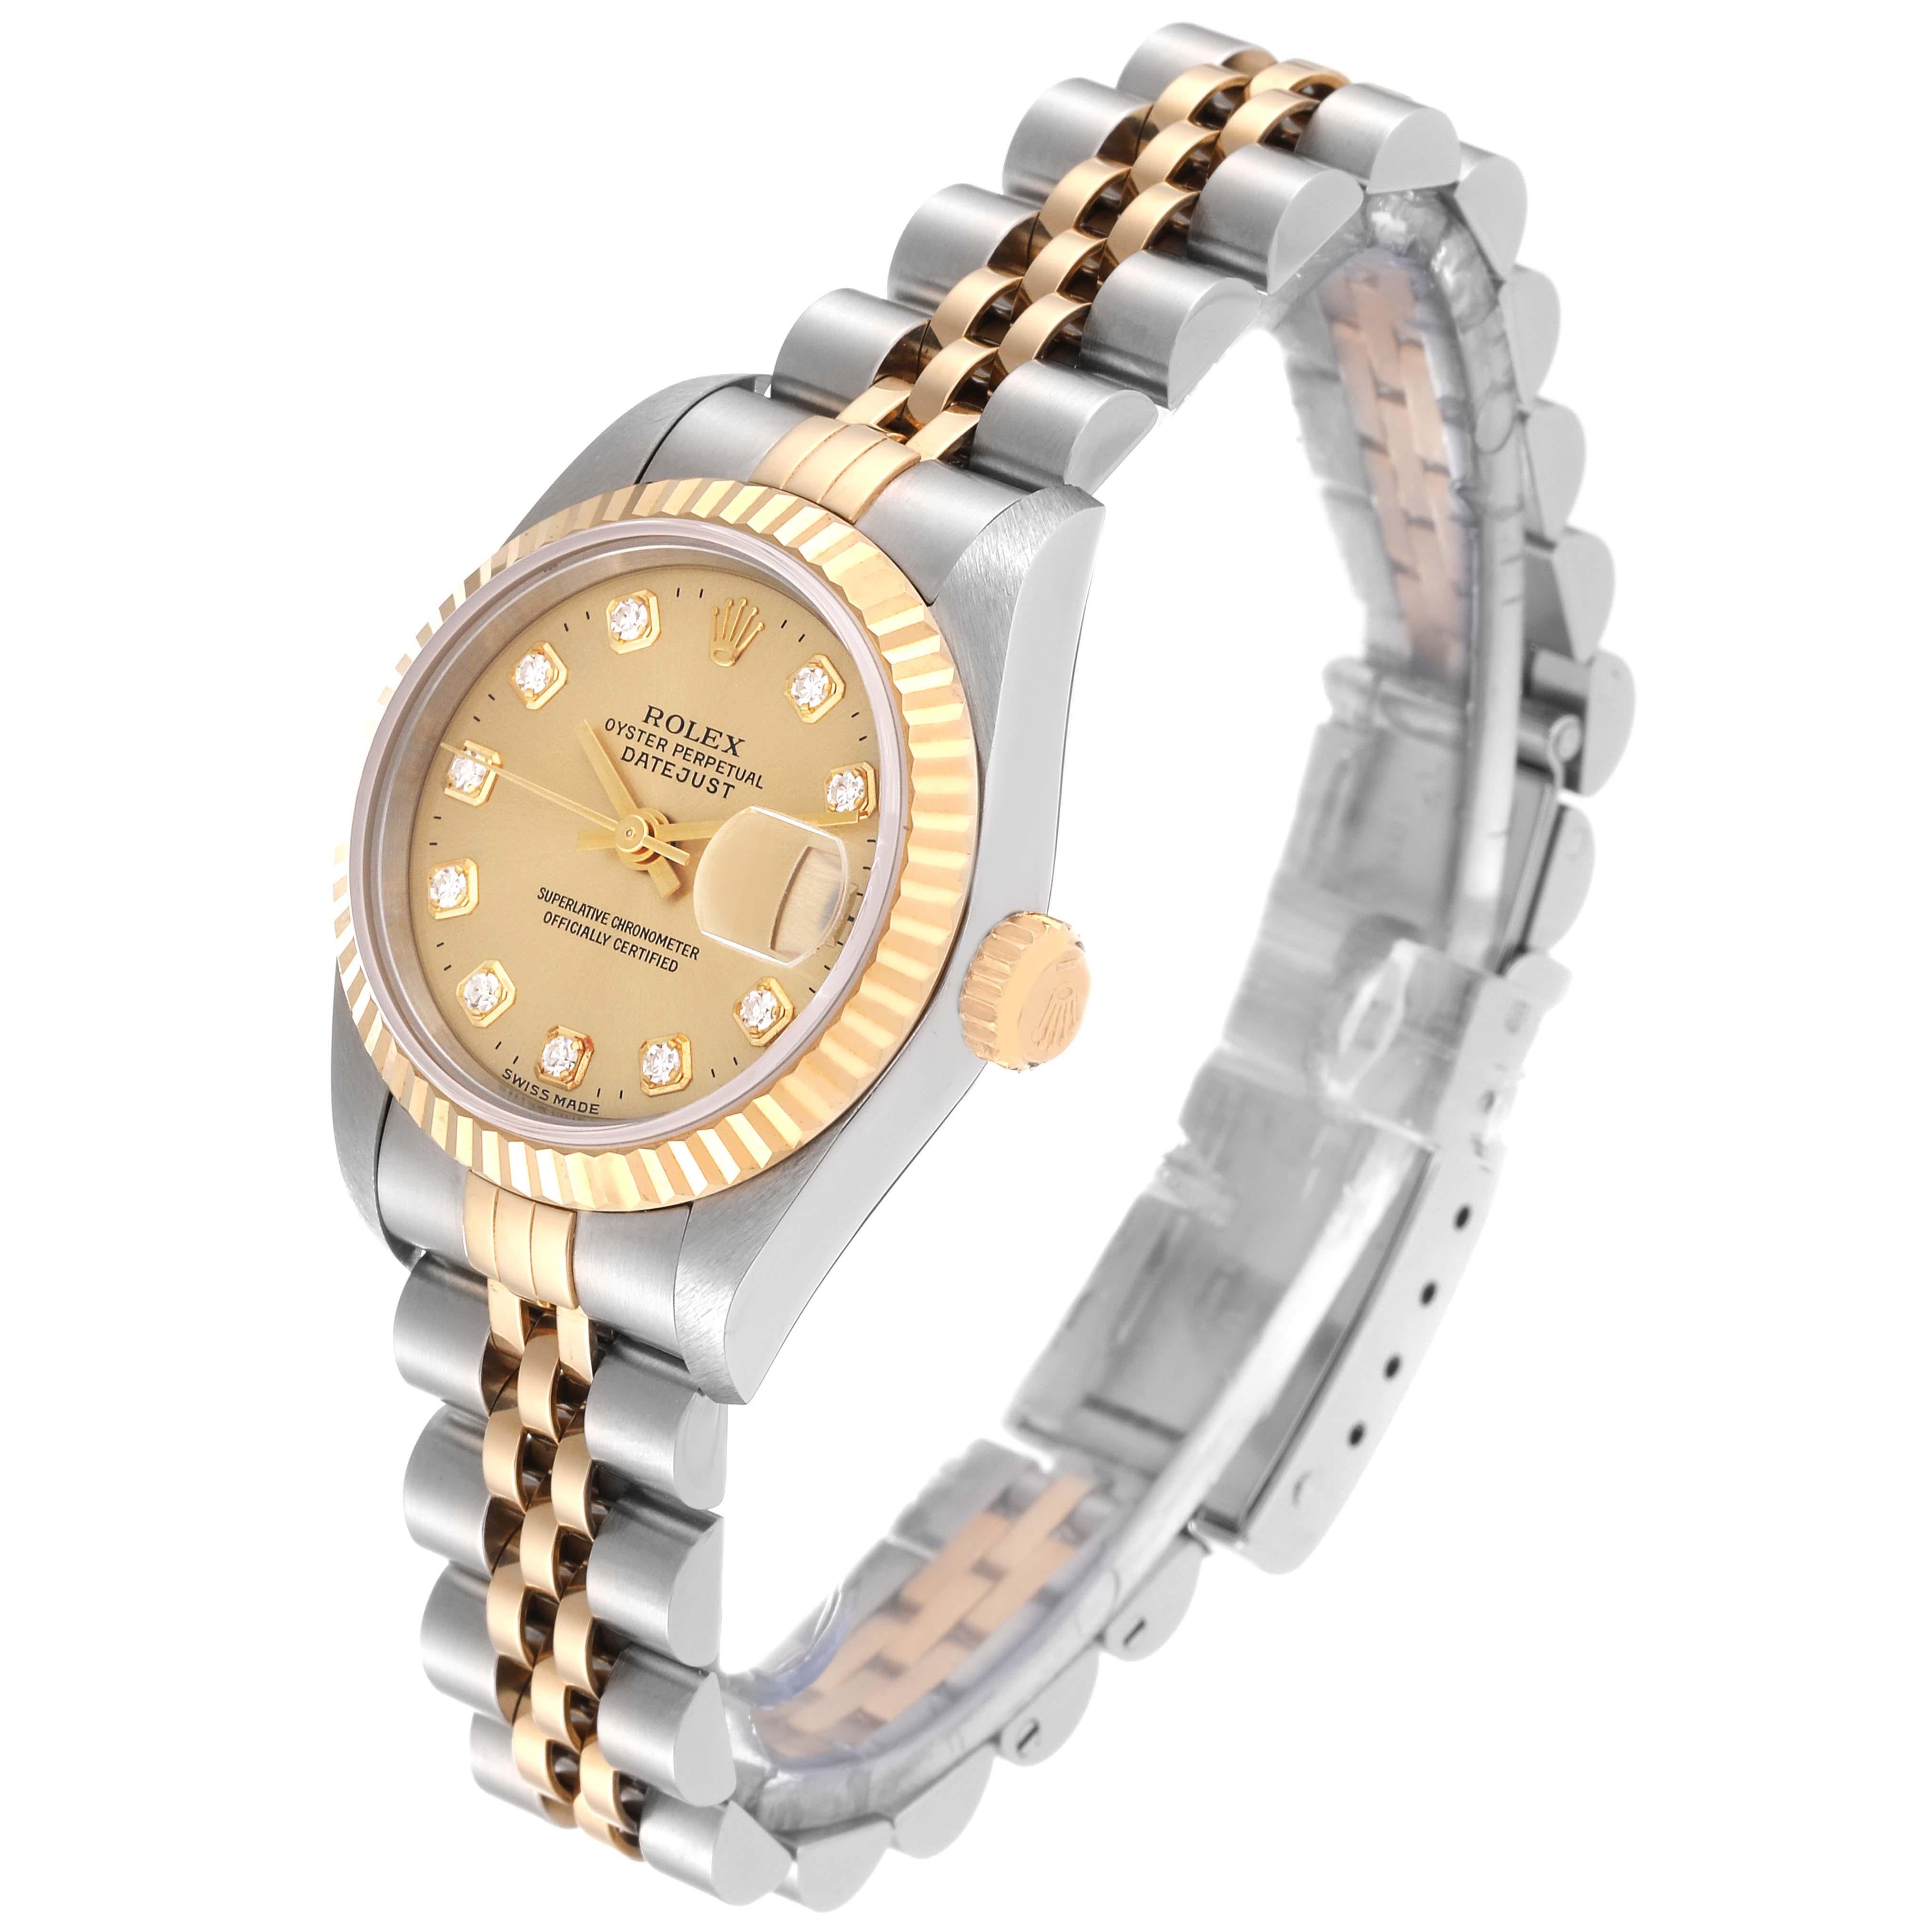 Rolex Datejust Diamond Dial Steel Yellow Gold Ladies Watch 69173 For Sale 1